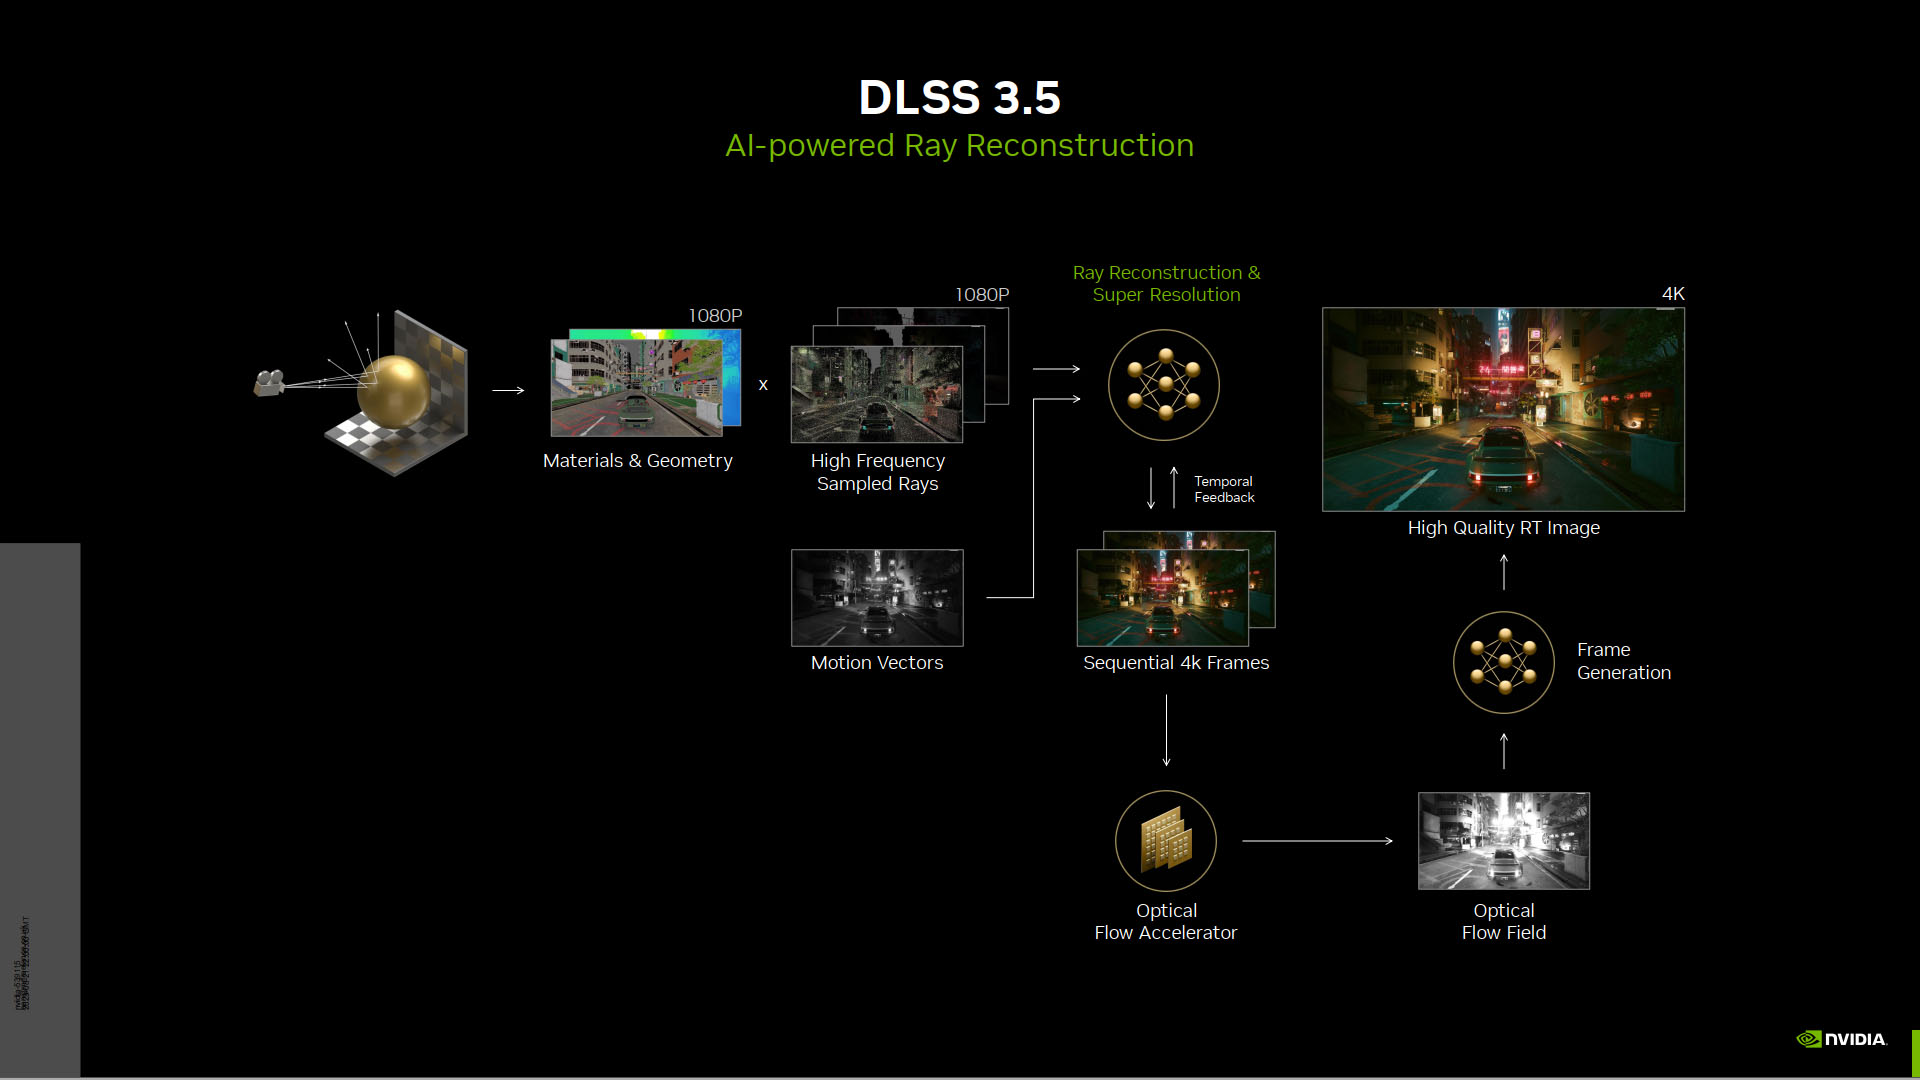 How Nvidia DLSS 3.5 works